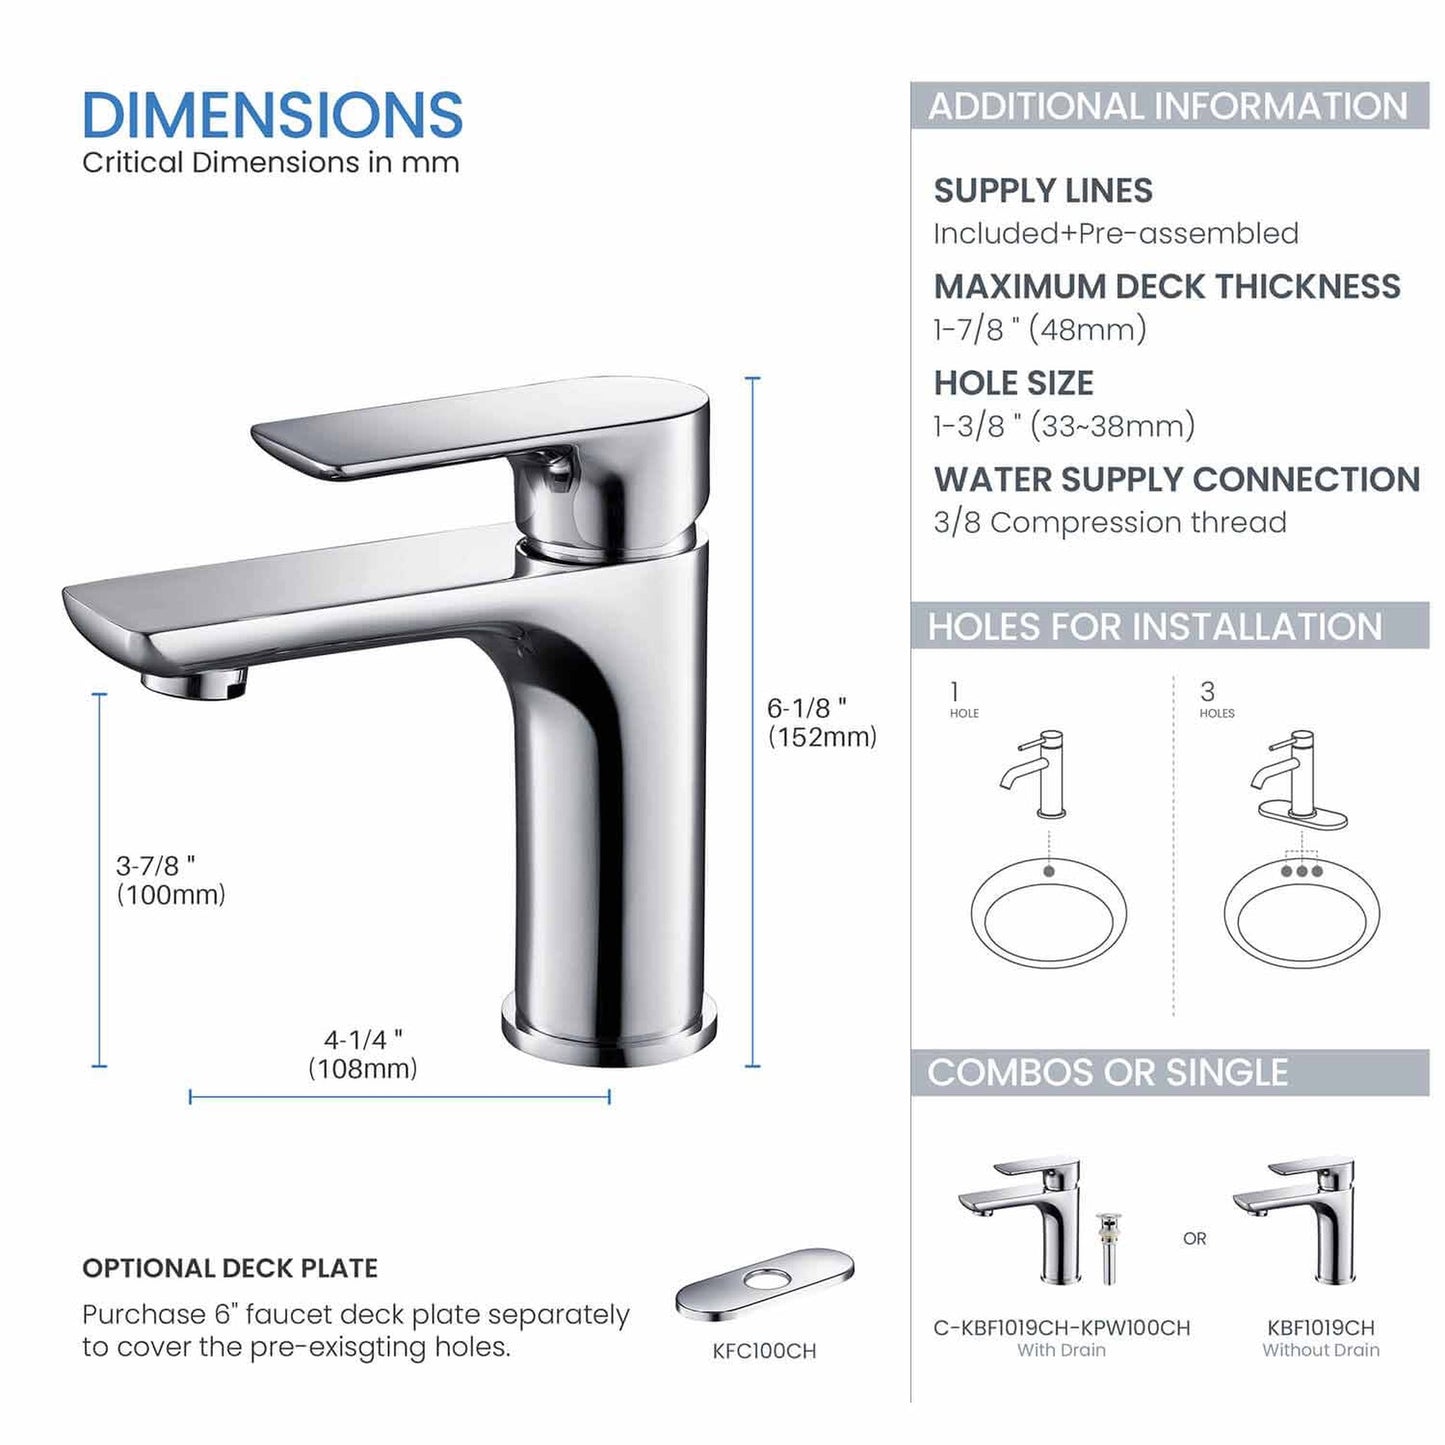 KIBI Tender Single Handle Chrome Solid Brass Bathroom Sink Faucet With Pop-Up Drain Stopper Small Cover With Overflow